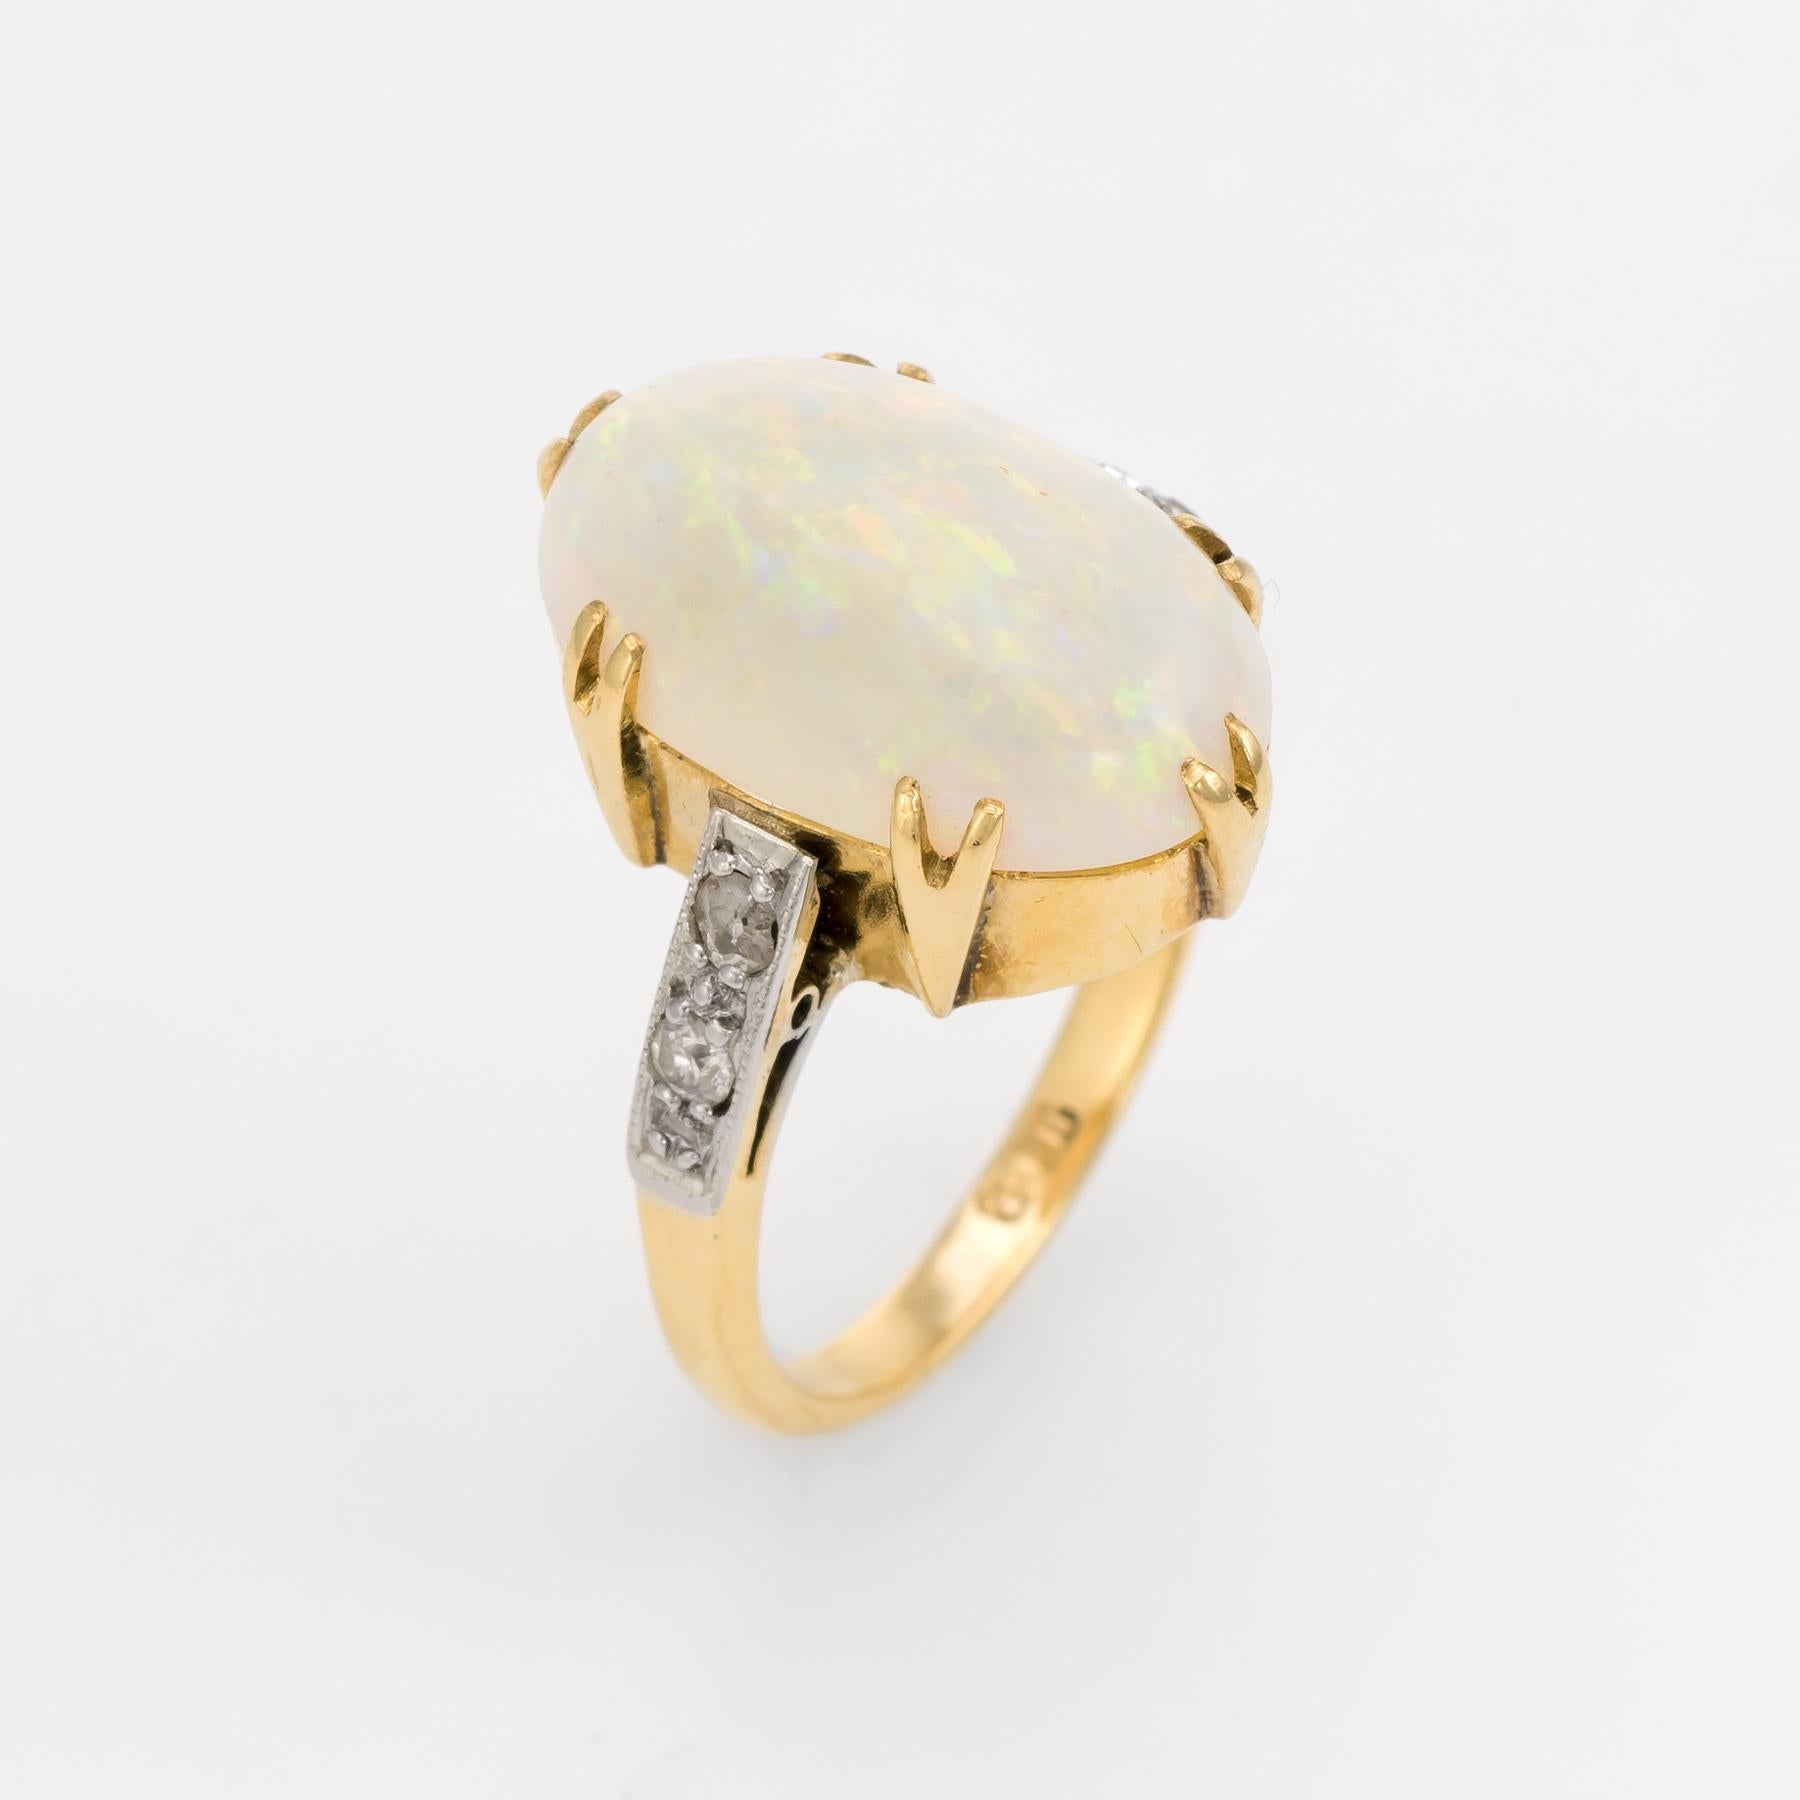 Elegant vintage Art Deco era cocktail ring (circa 1920s to 1930s), crafted in 18 karat yellow gold. 

Centrally mounted cabochon cut natural opal measures 16mm x 10mm (estimated at 7.50 carats), accented with an estimated 0.08 carats of old mine cut